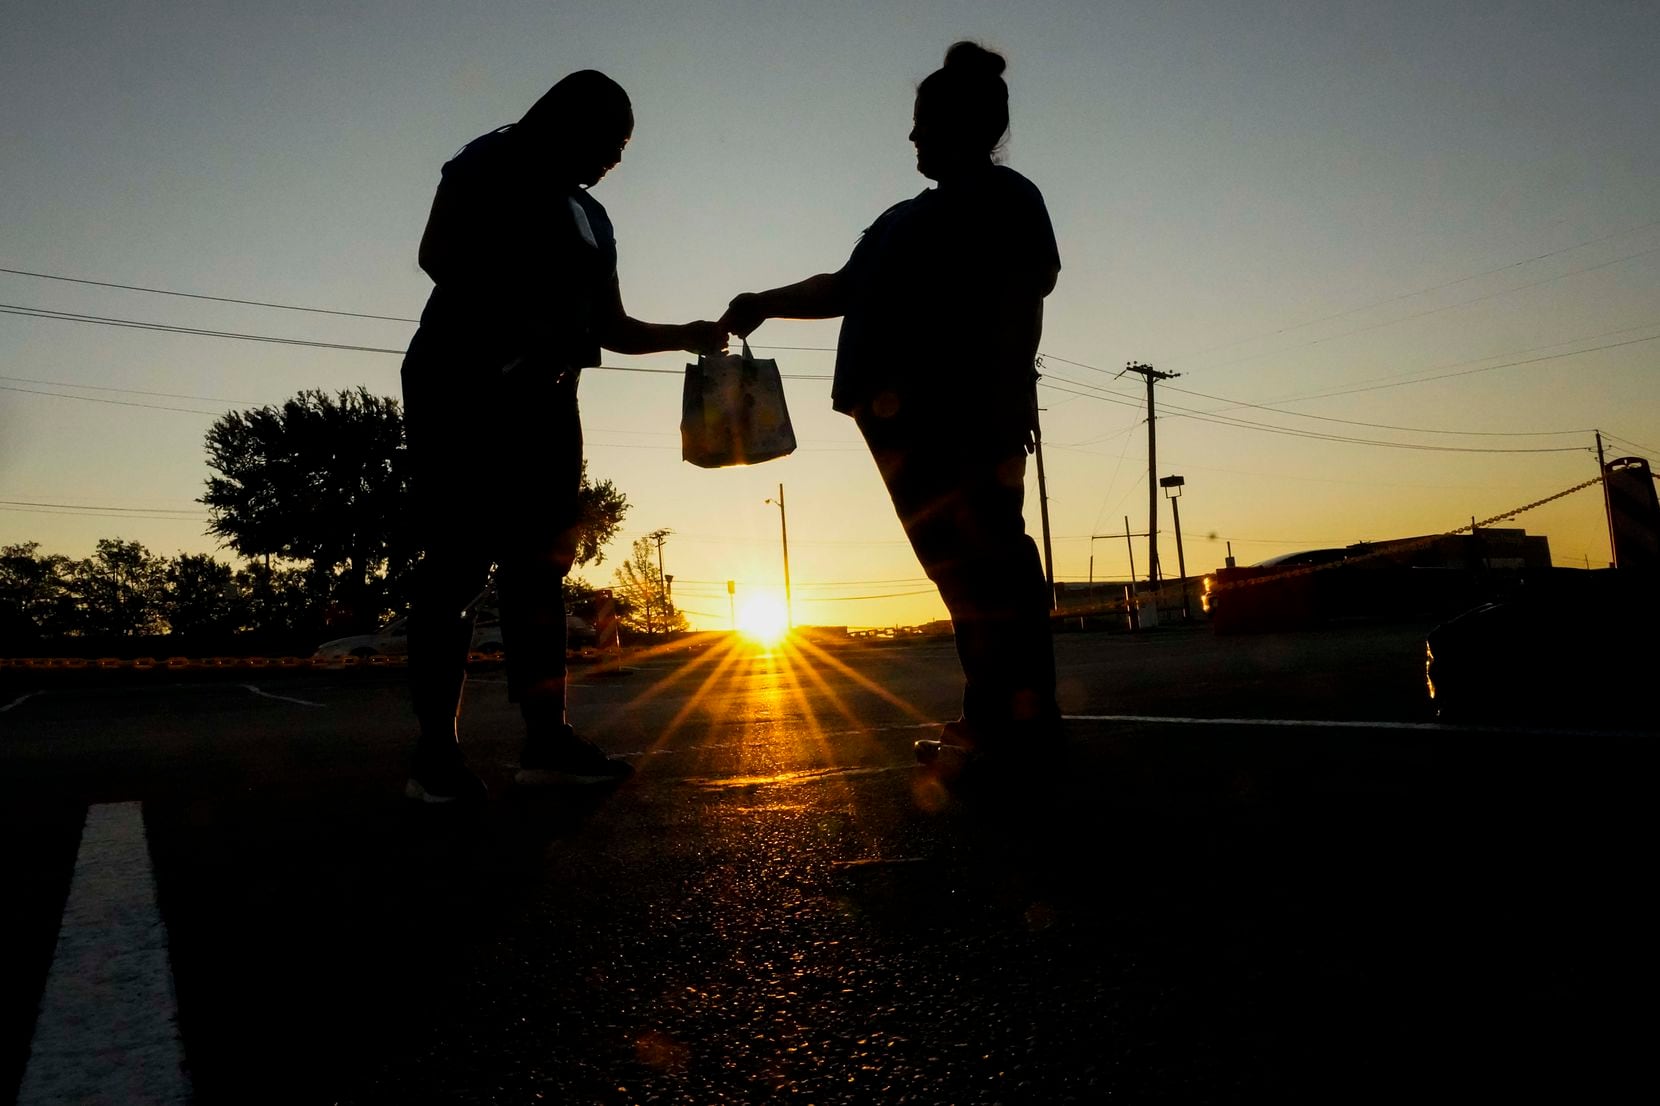 Parkland Homeless Outreach Medical Services (HOMES) program nurse manager Dolores Diaz (right) hands a gift to colleague Nicoya Hutcherson at they arrive for work at 7:00 a.m. as the sun rises at a COVID-19 drive-through testing site at the hospital on Thursday, April 23, 2020. (Smiley N. Pool/The Dallas Morning News)